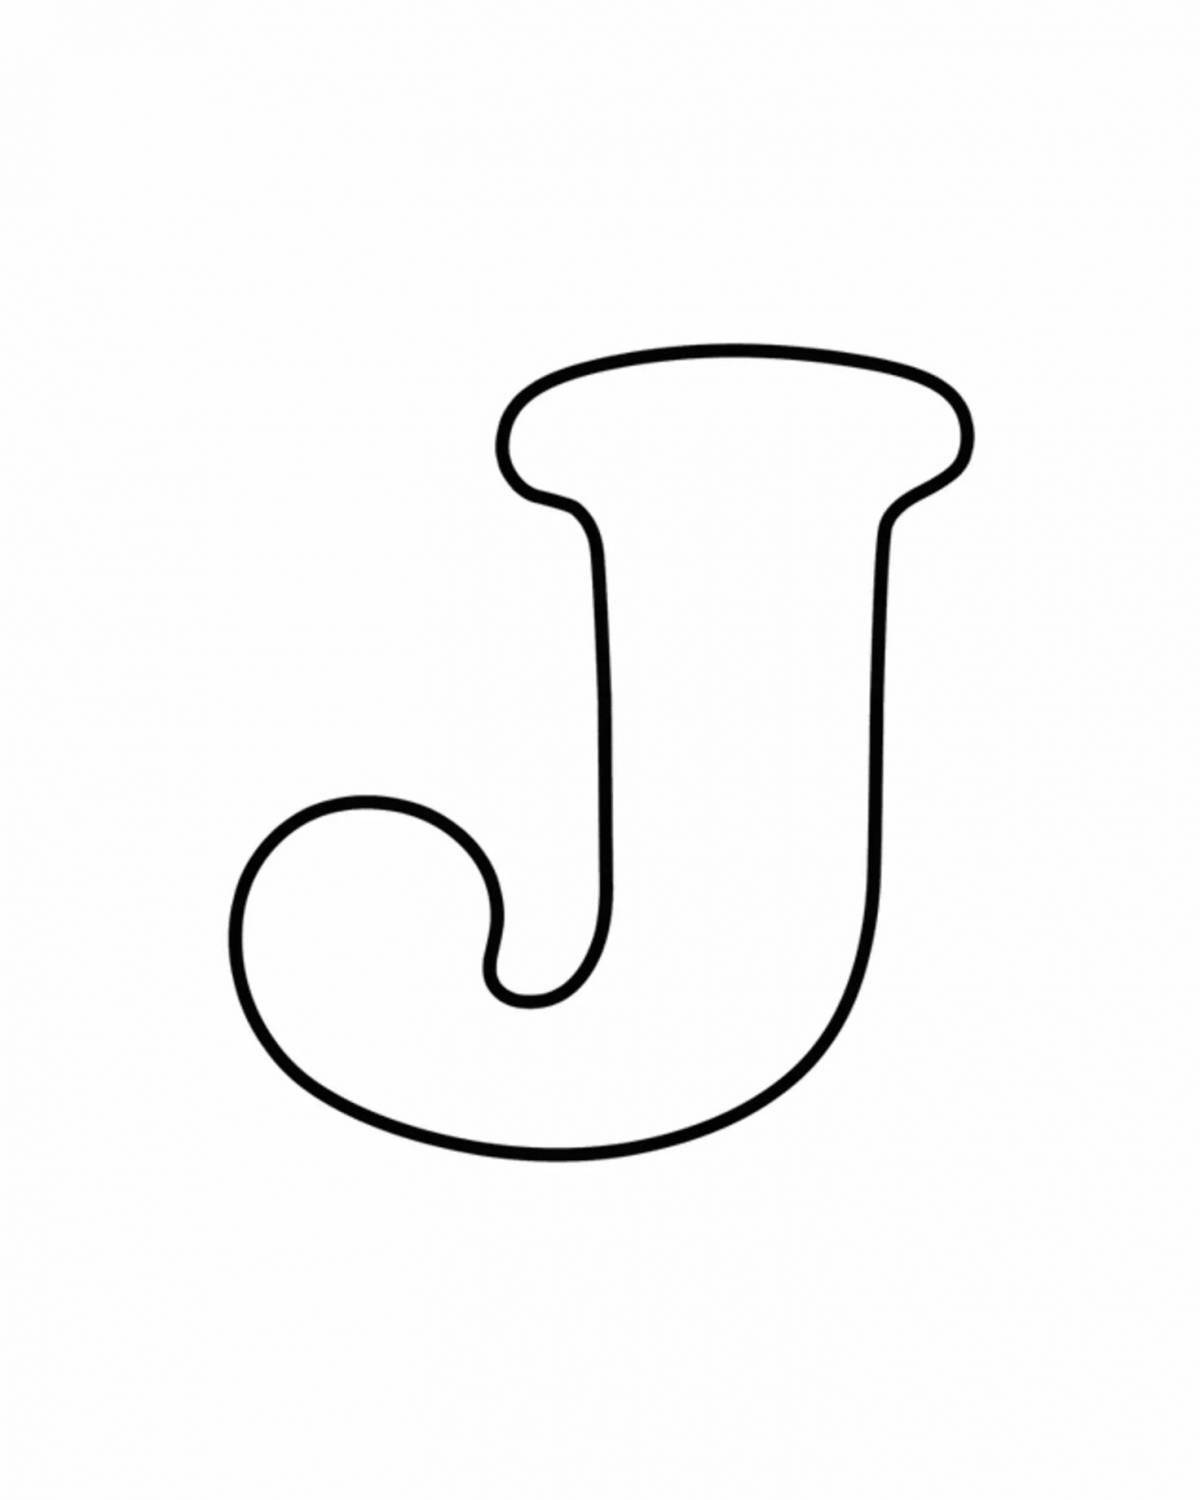 Exciting letter j coloring book